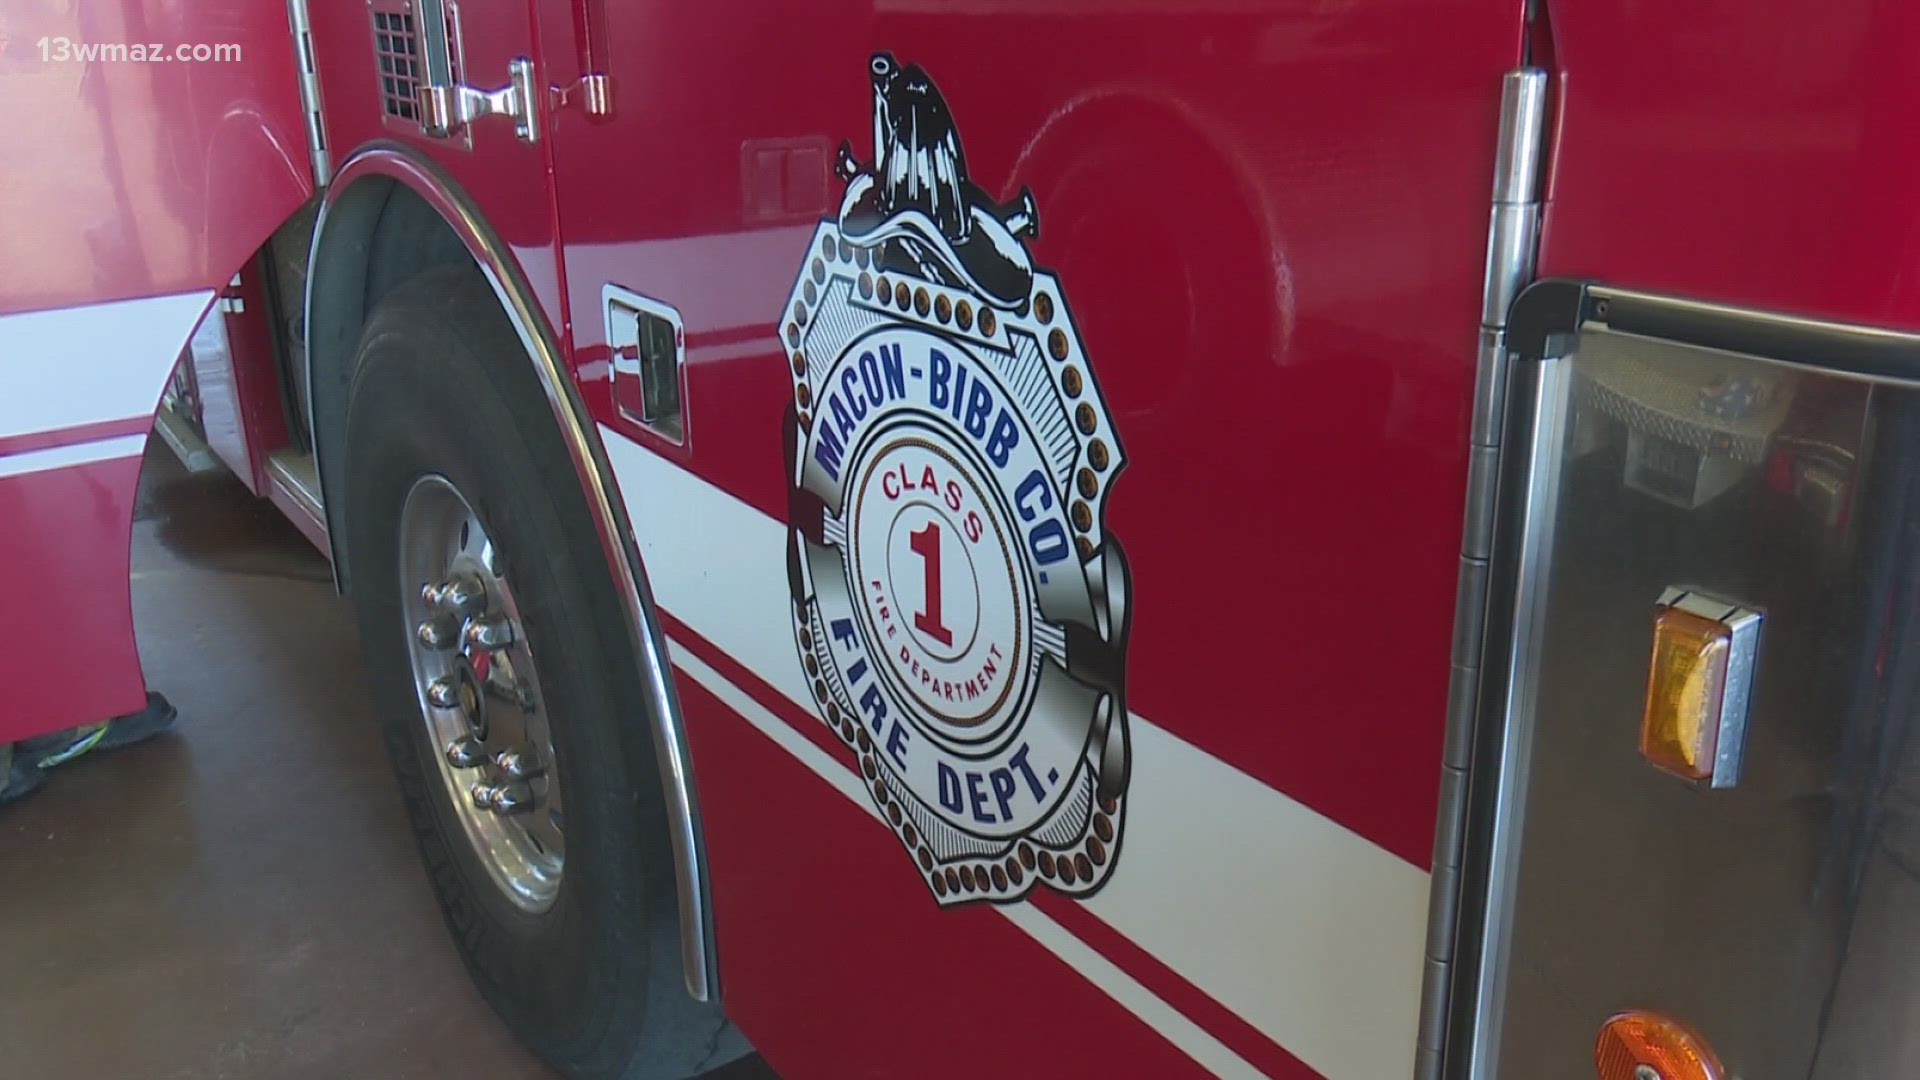 439 people who've worked 10 or more years with the Bibb County Fire Department, Sheriff's Office, and other agencies got their share of $1.8 million.